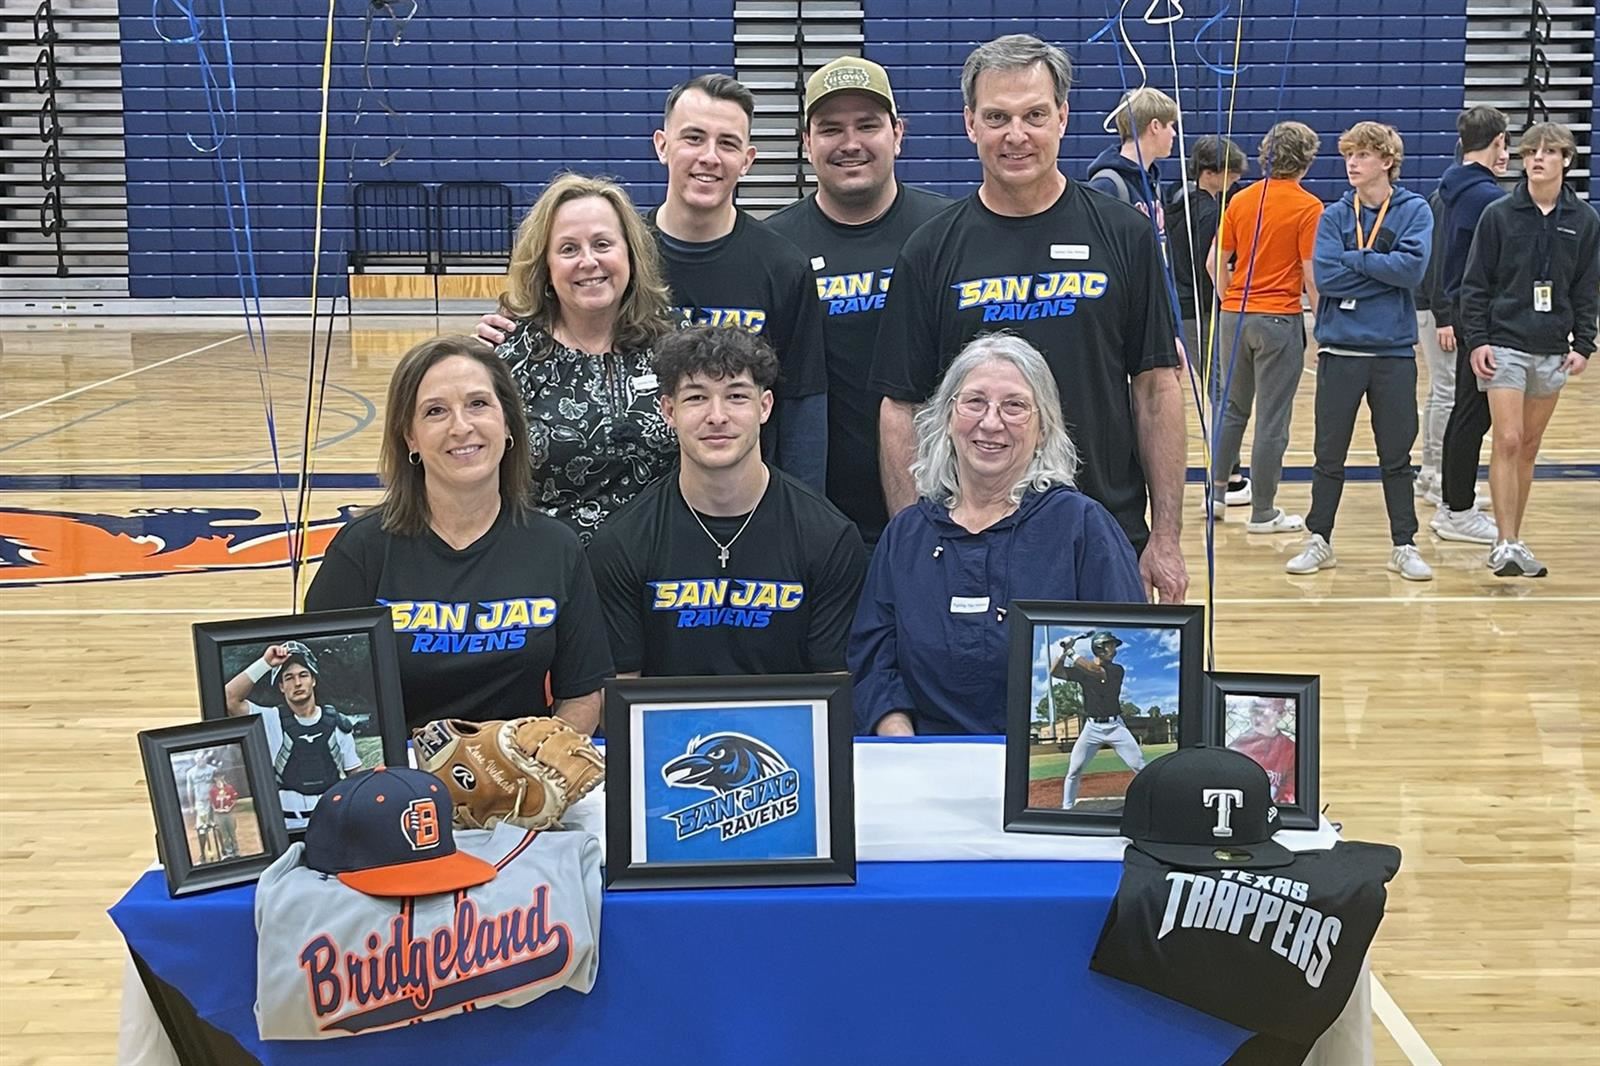 Bridgeland High School senior Lane Vicknair, seated center, poses with his family after signing his letter of intent.